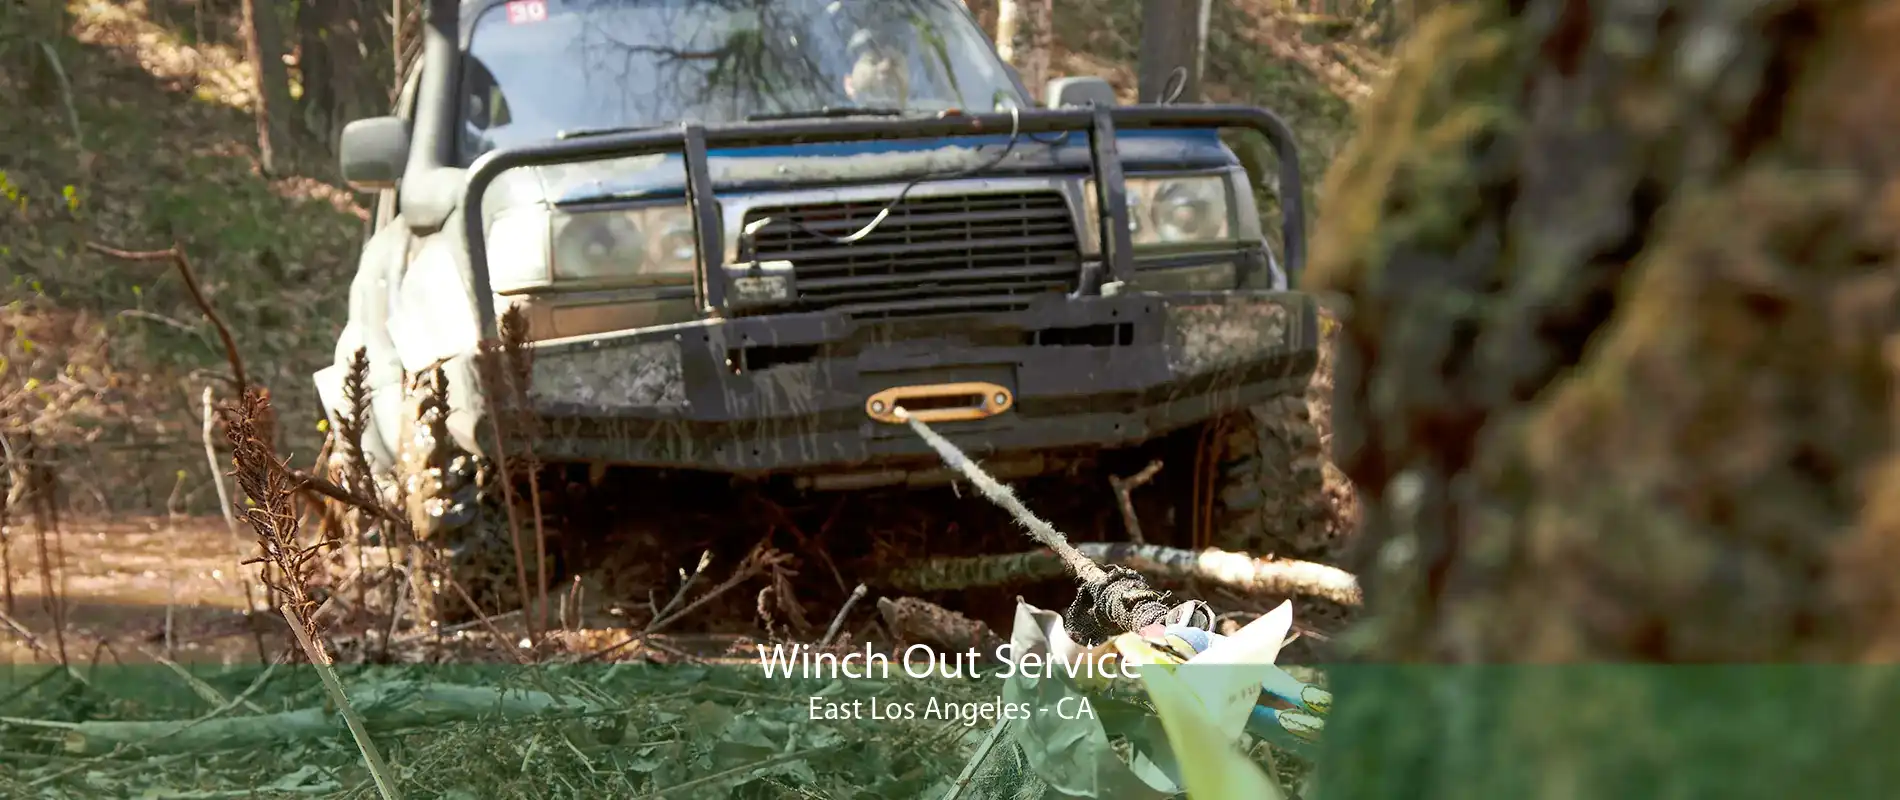 Winch Out Service East Los Angeles - CA